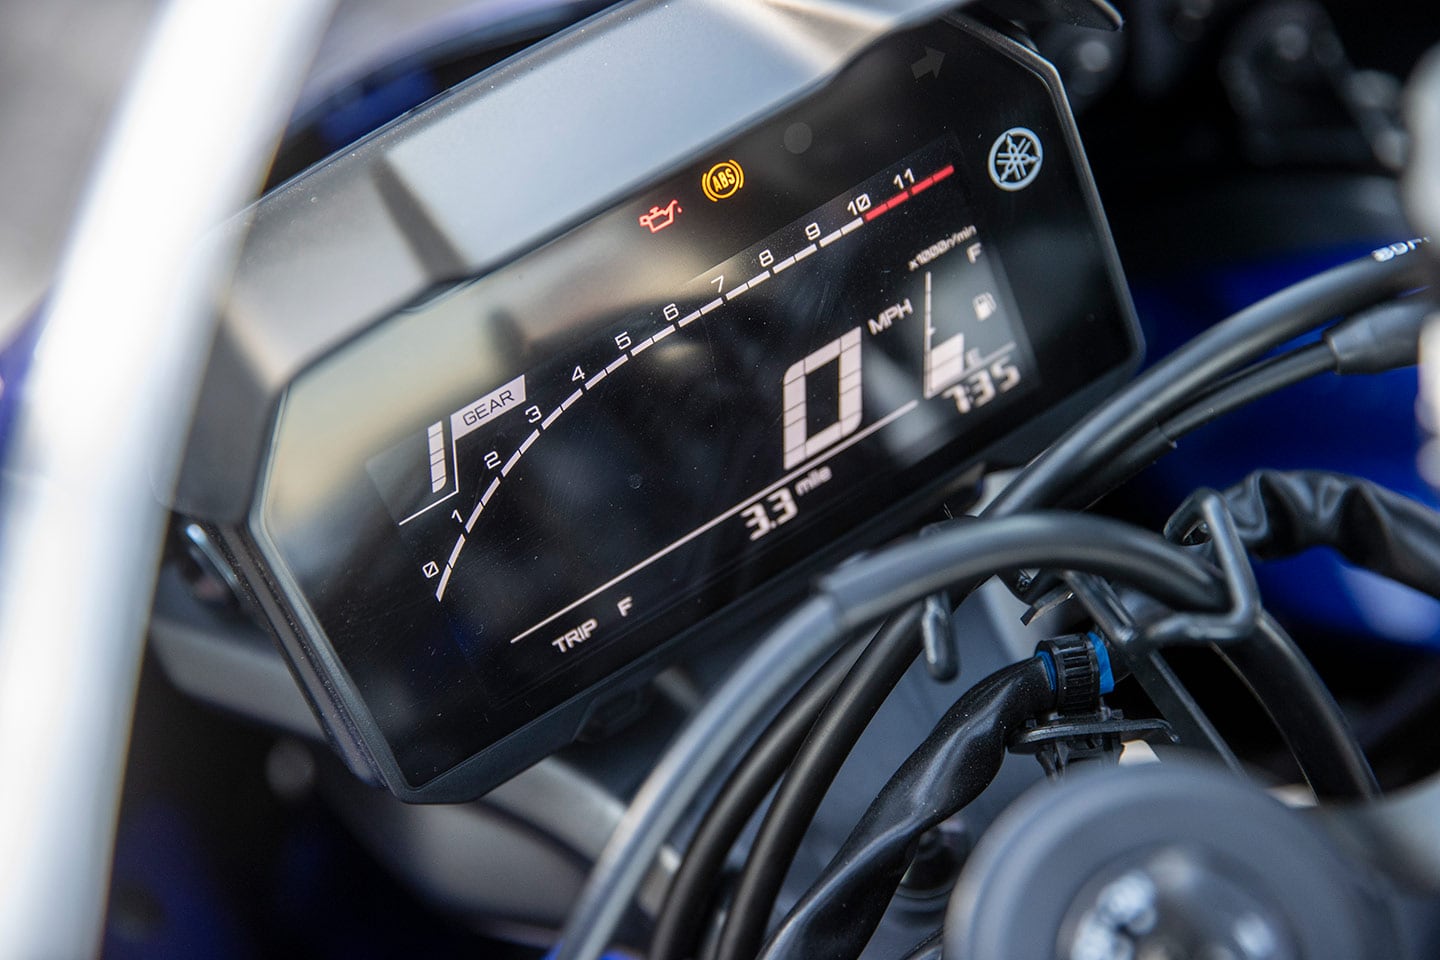 The Yamaha R7’s dash feels dated, while the bike lacks electronic rider aids.